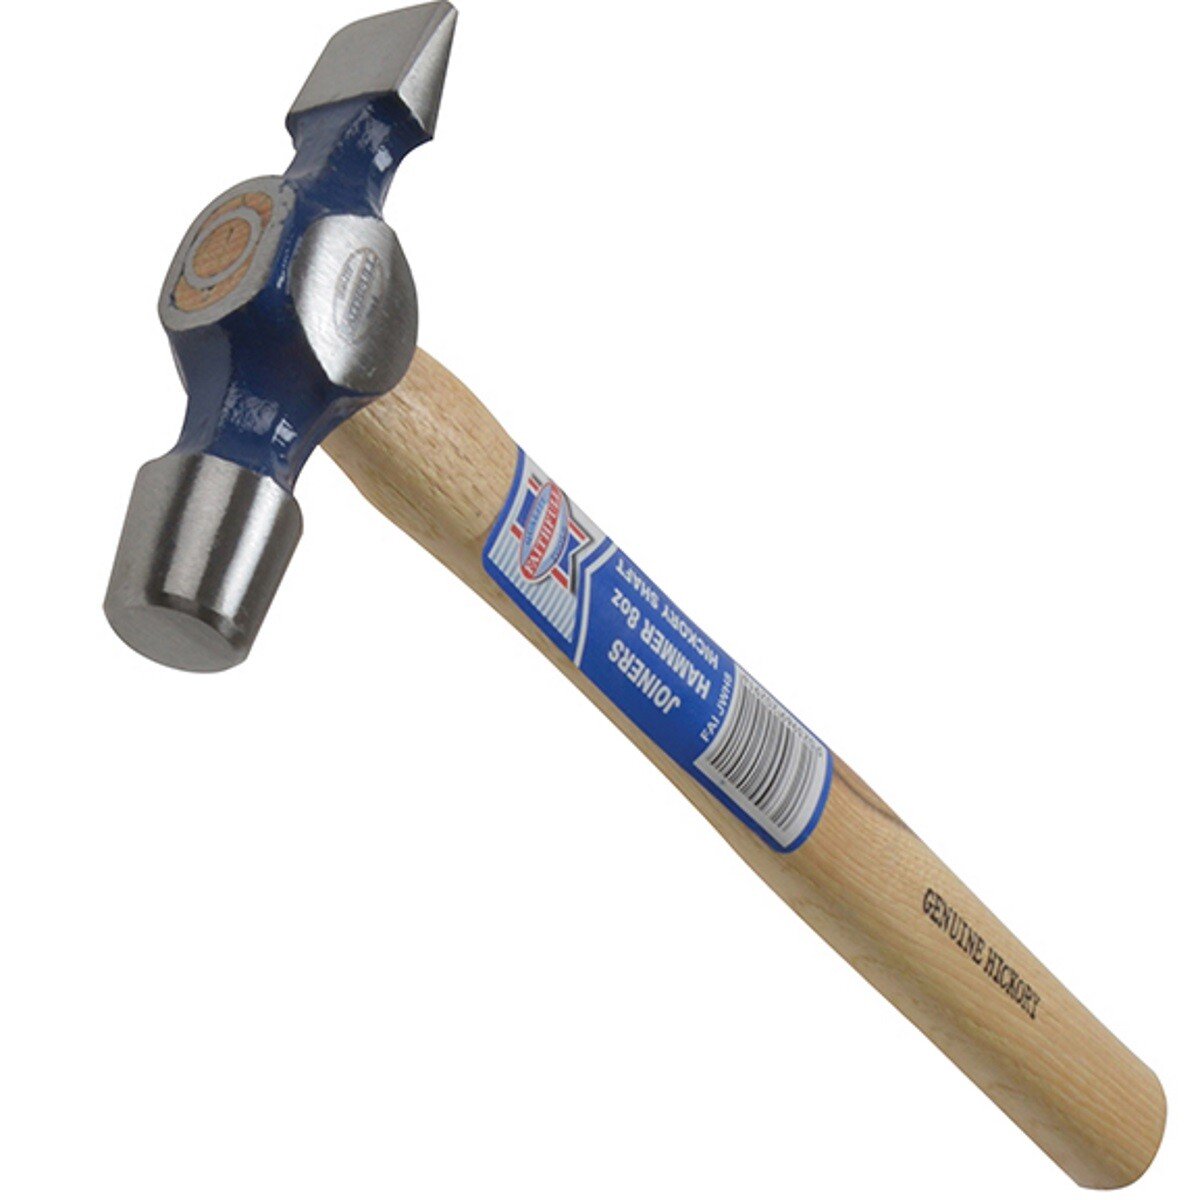 Faithfull FAIJWH8 Joiners Hammer 227g (8oz) from Lawson HIS